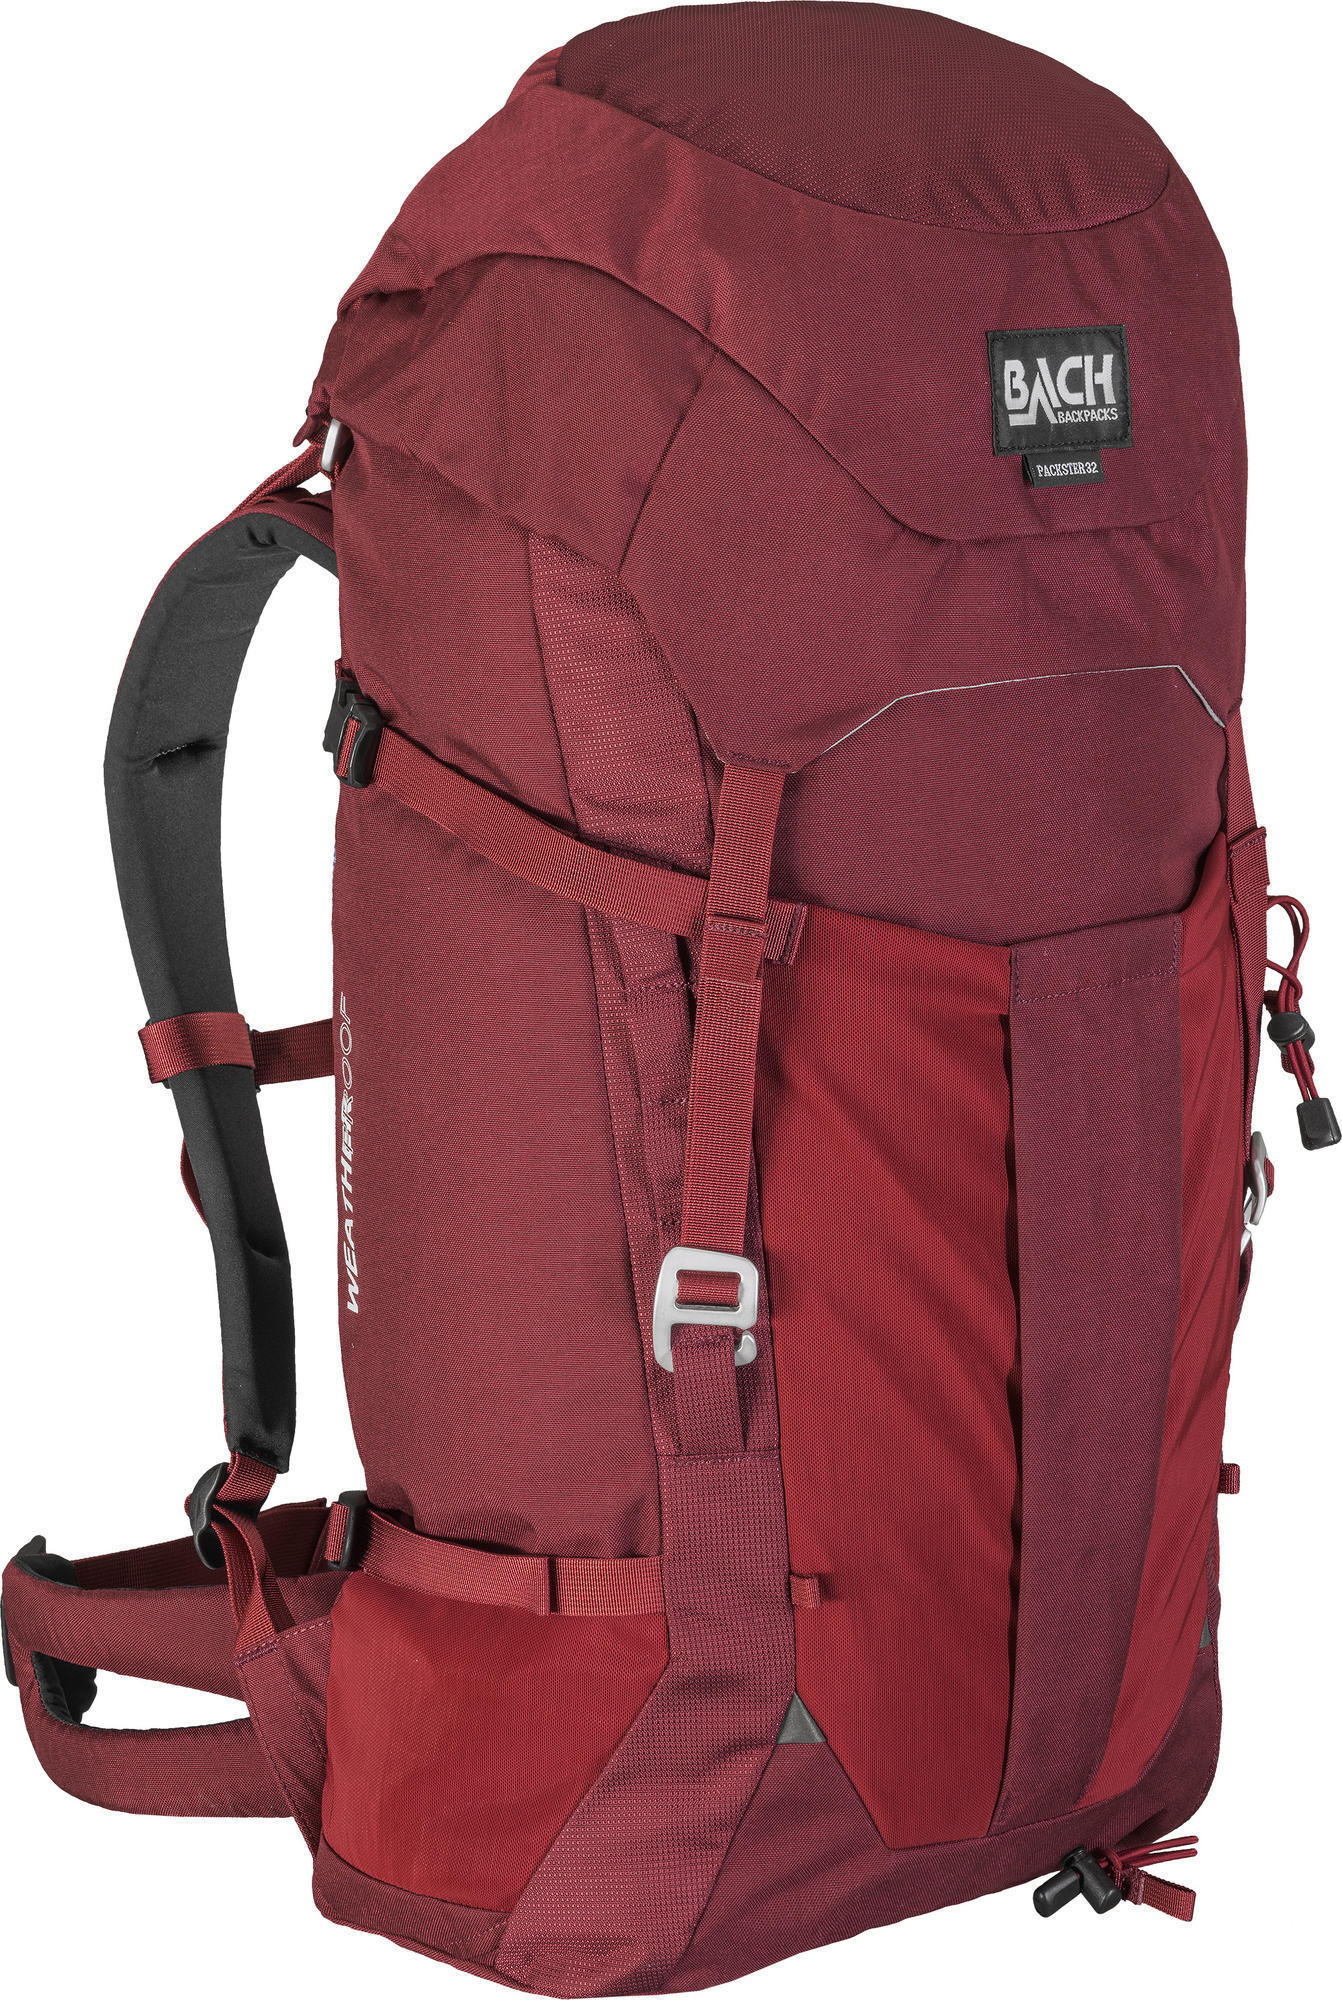 Bach Packster 33 - Walking backpack